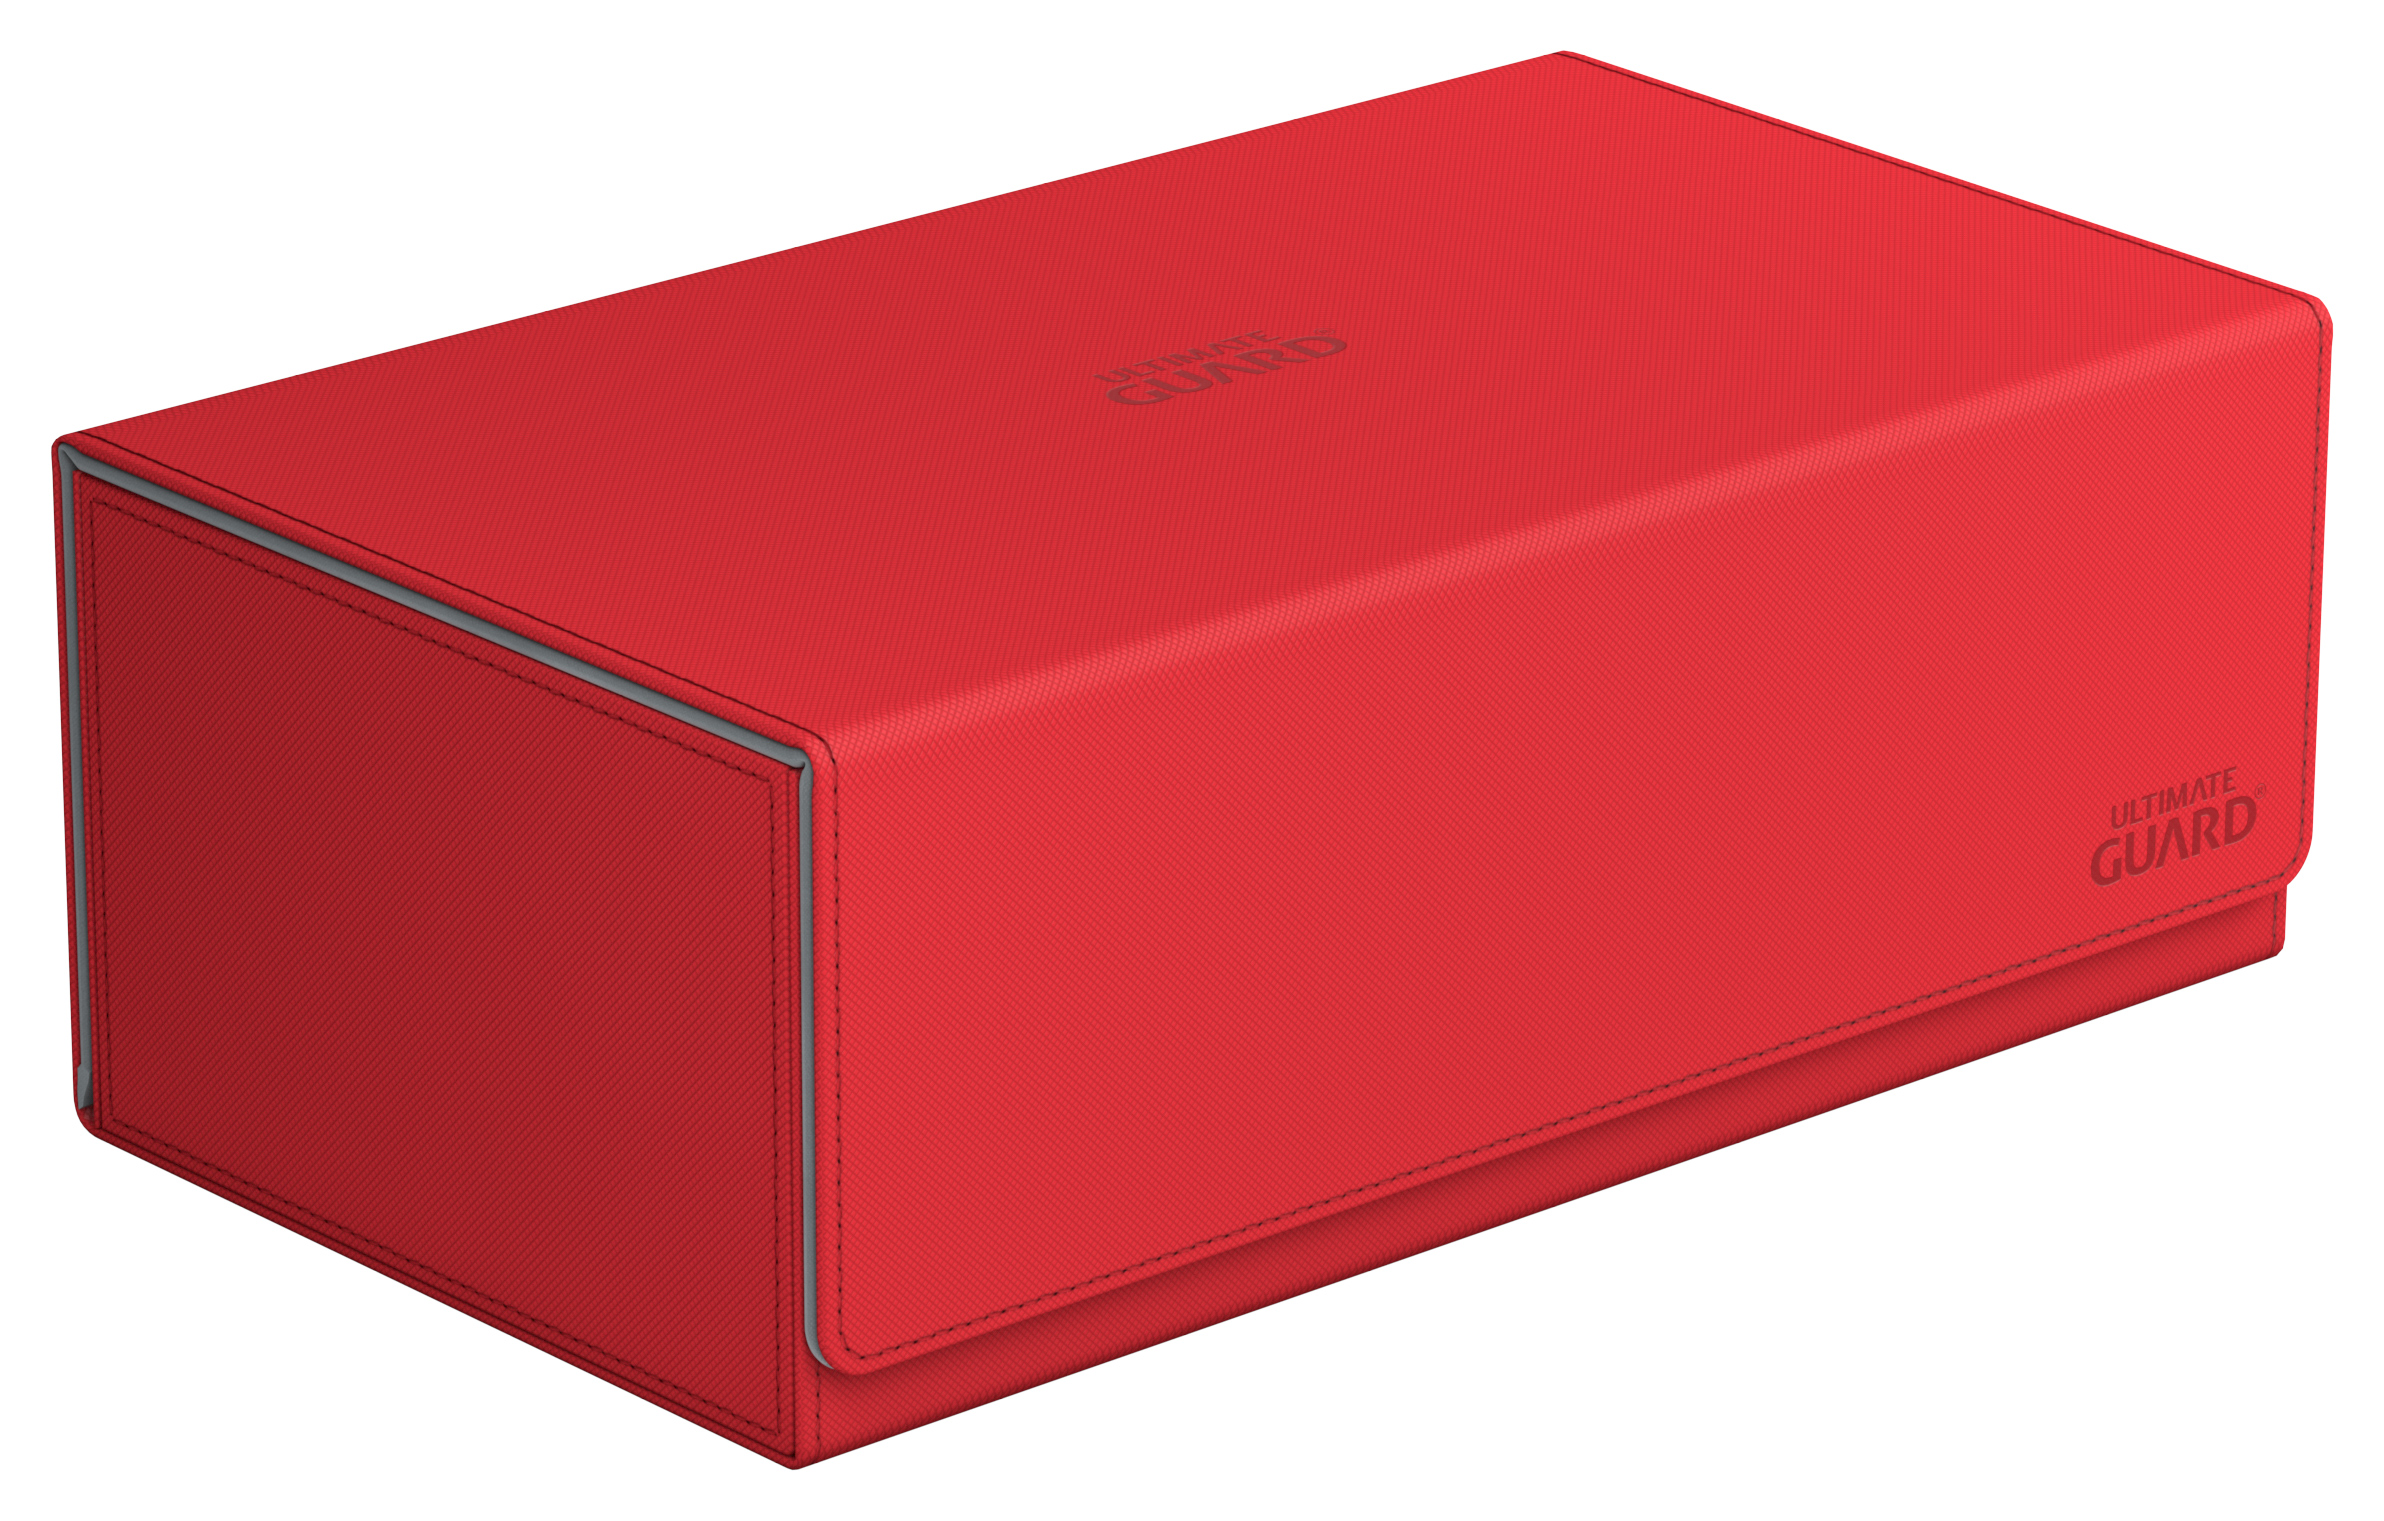 Details about   Ultimate Guard Arkhive 800 Red